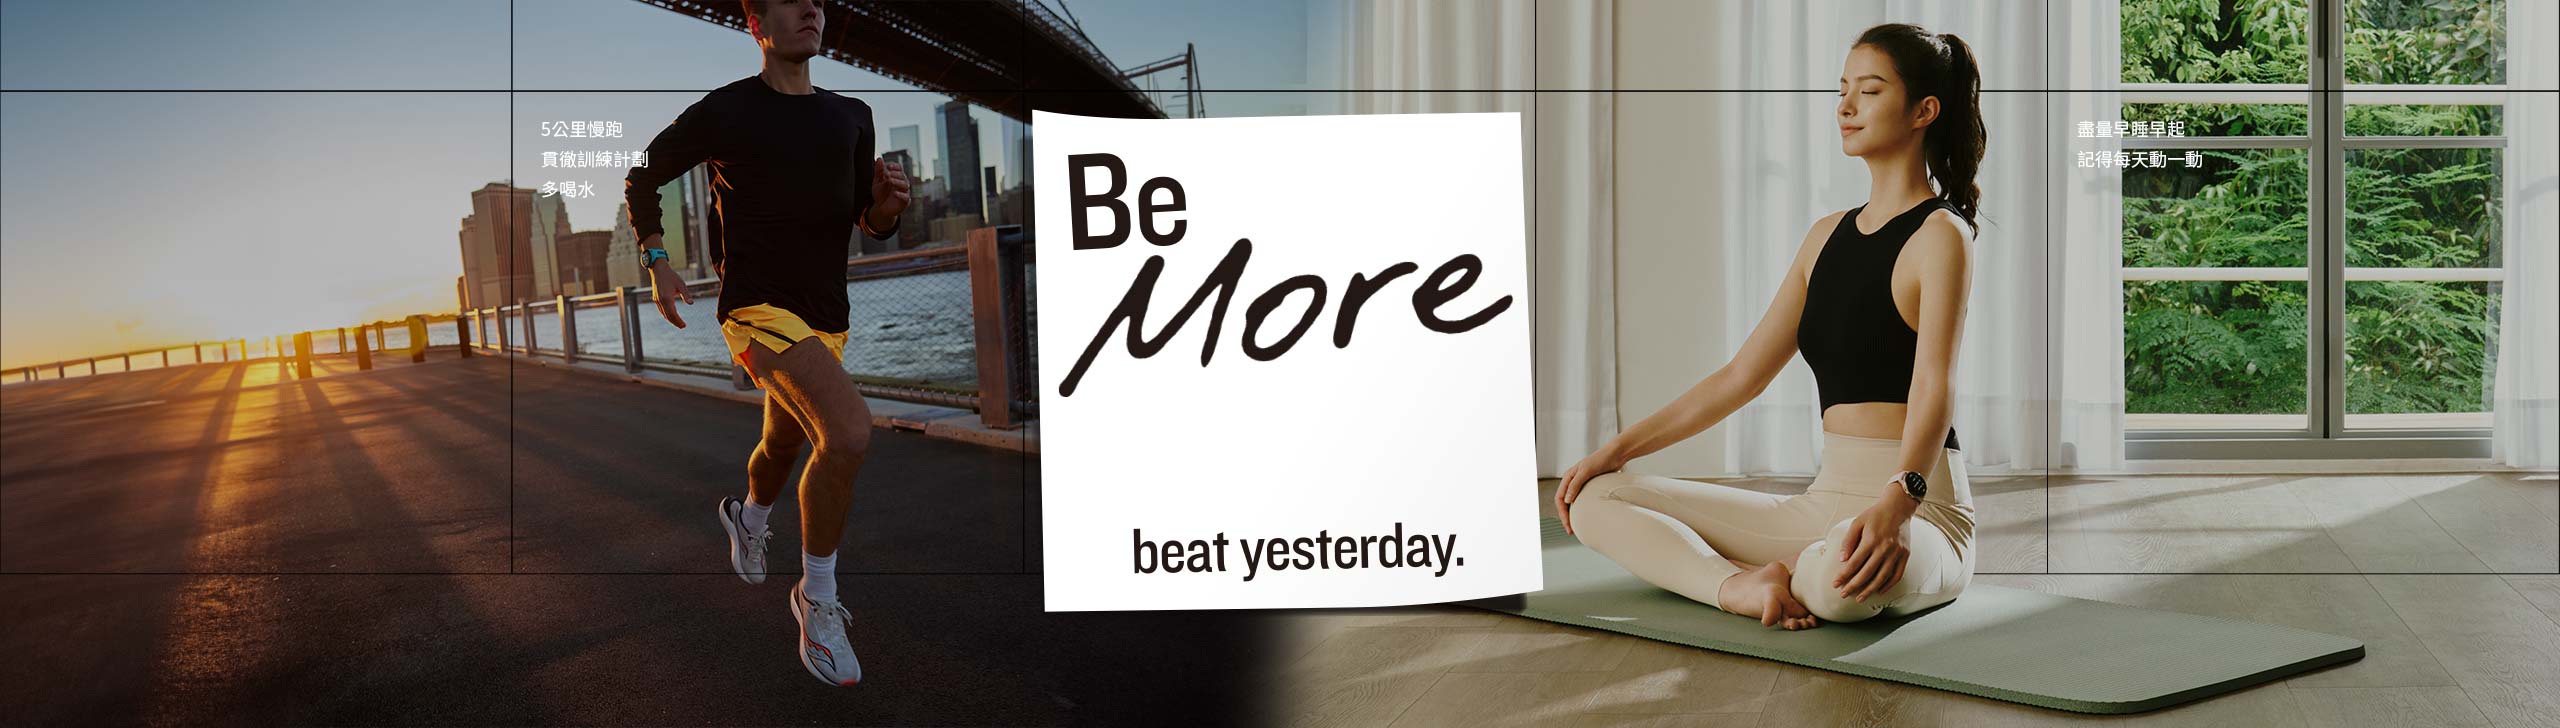 Be More, Beat Yesterday - 前進更好的你